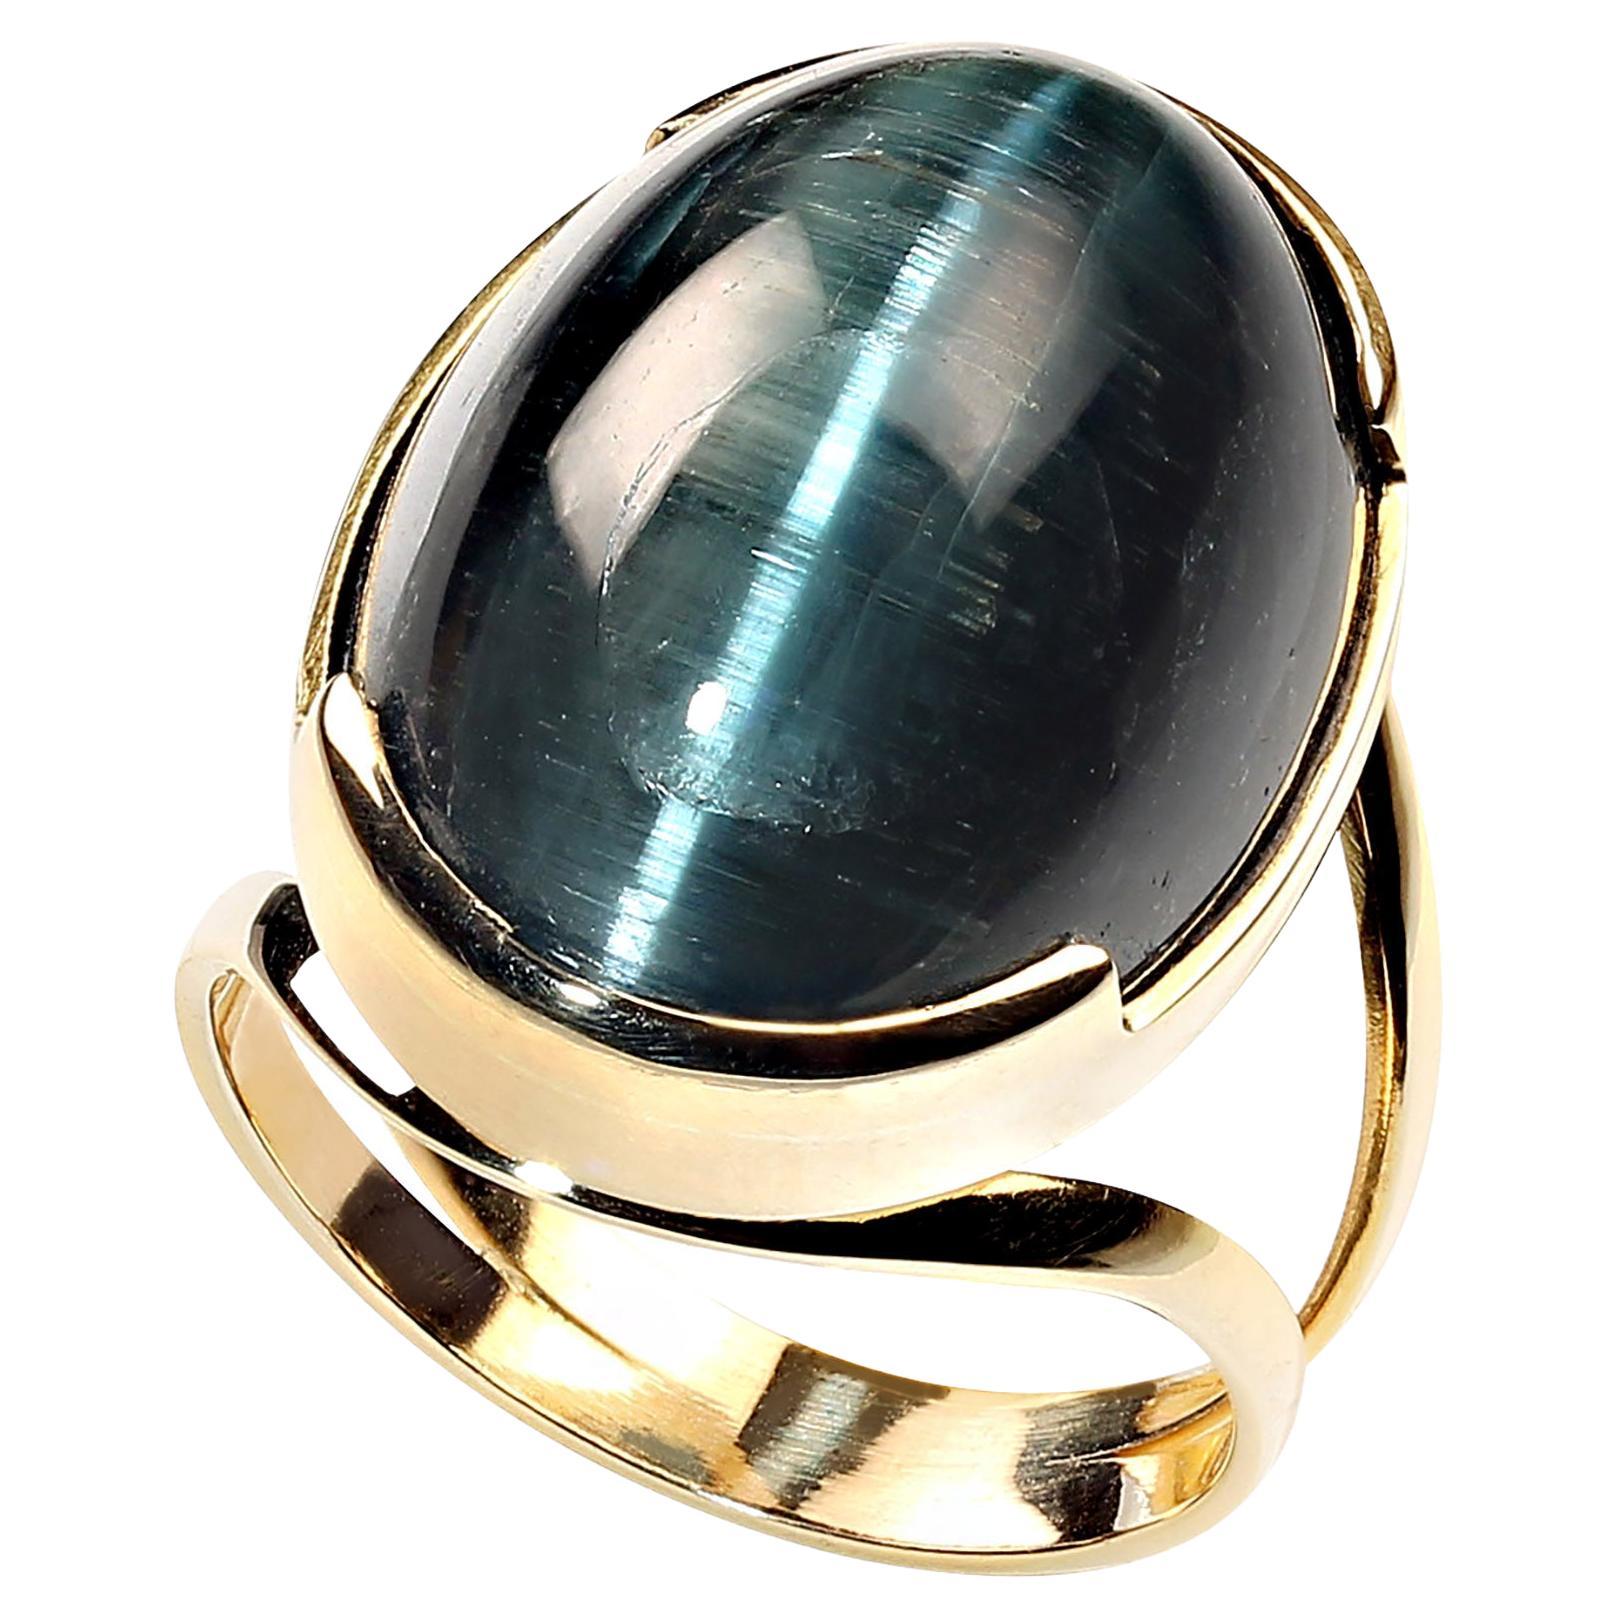 Magnificent 24 carat cat's eye blue-green tourmaline in handmade 18KT gold setting. This unique ring combines the incredible beauty of Brazilian gemstones and quality of Brazilian craftmanship. This oval cabochon is approximately 7/8 inches from